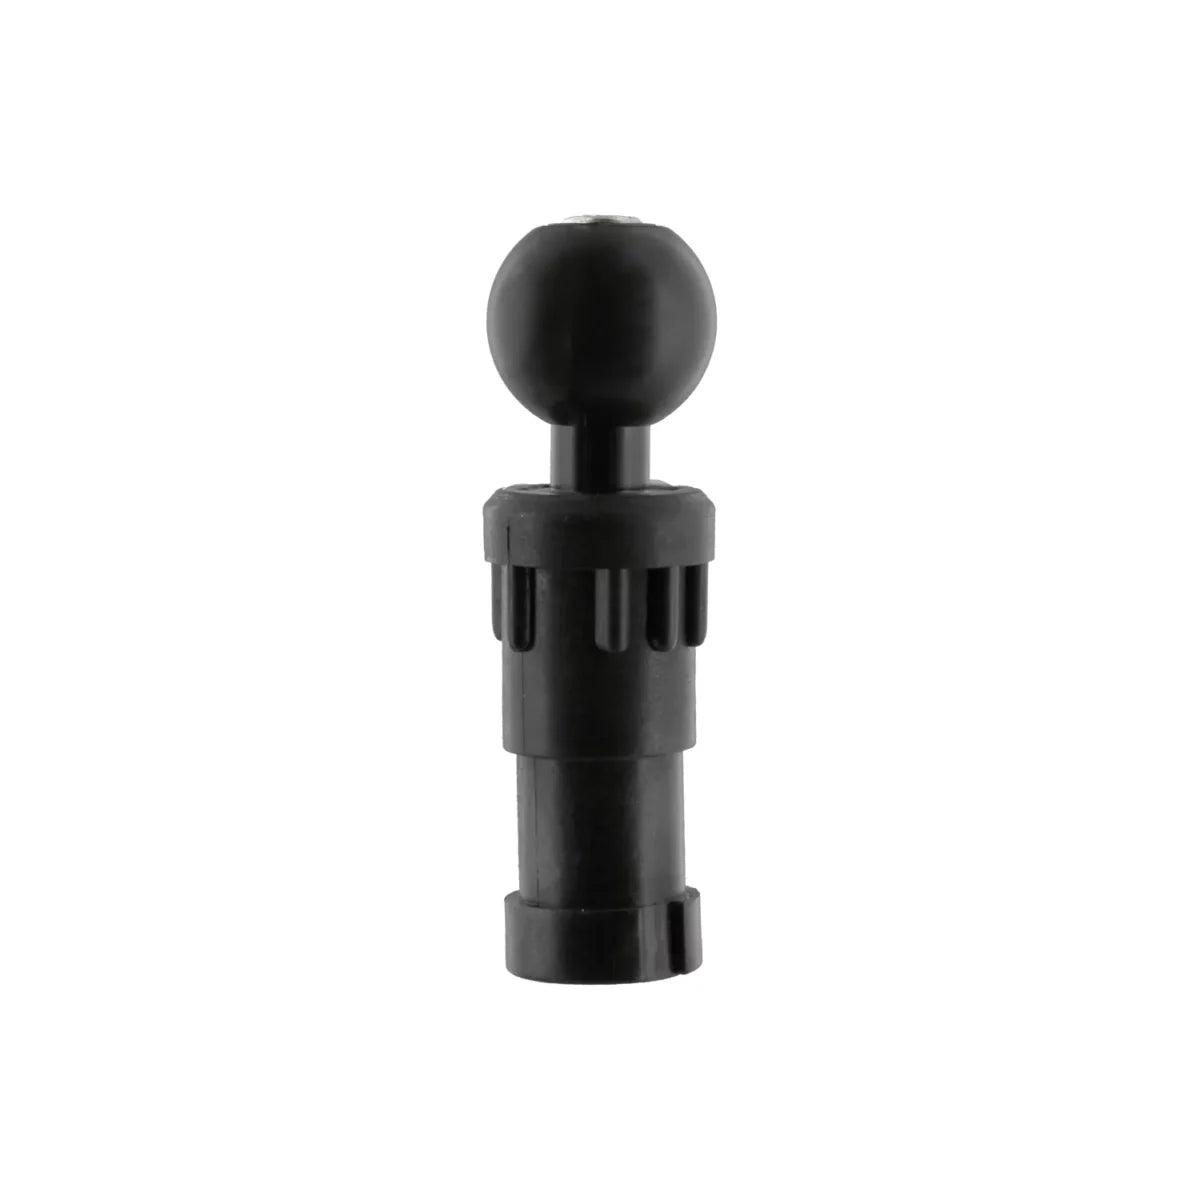 Scotty #159 Ball Mounting System - 1" Ball with Post